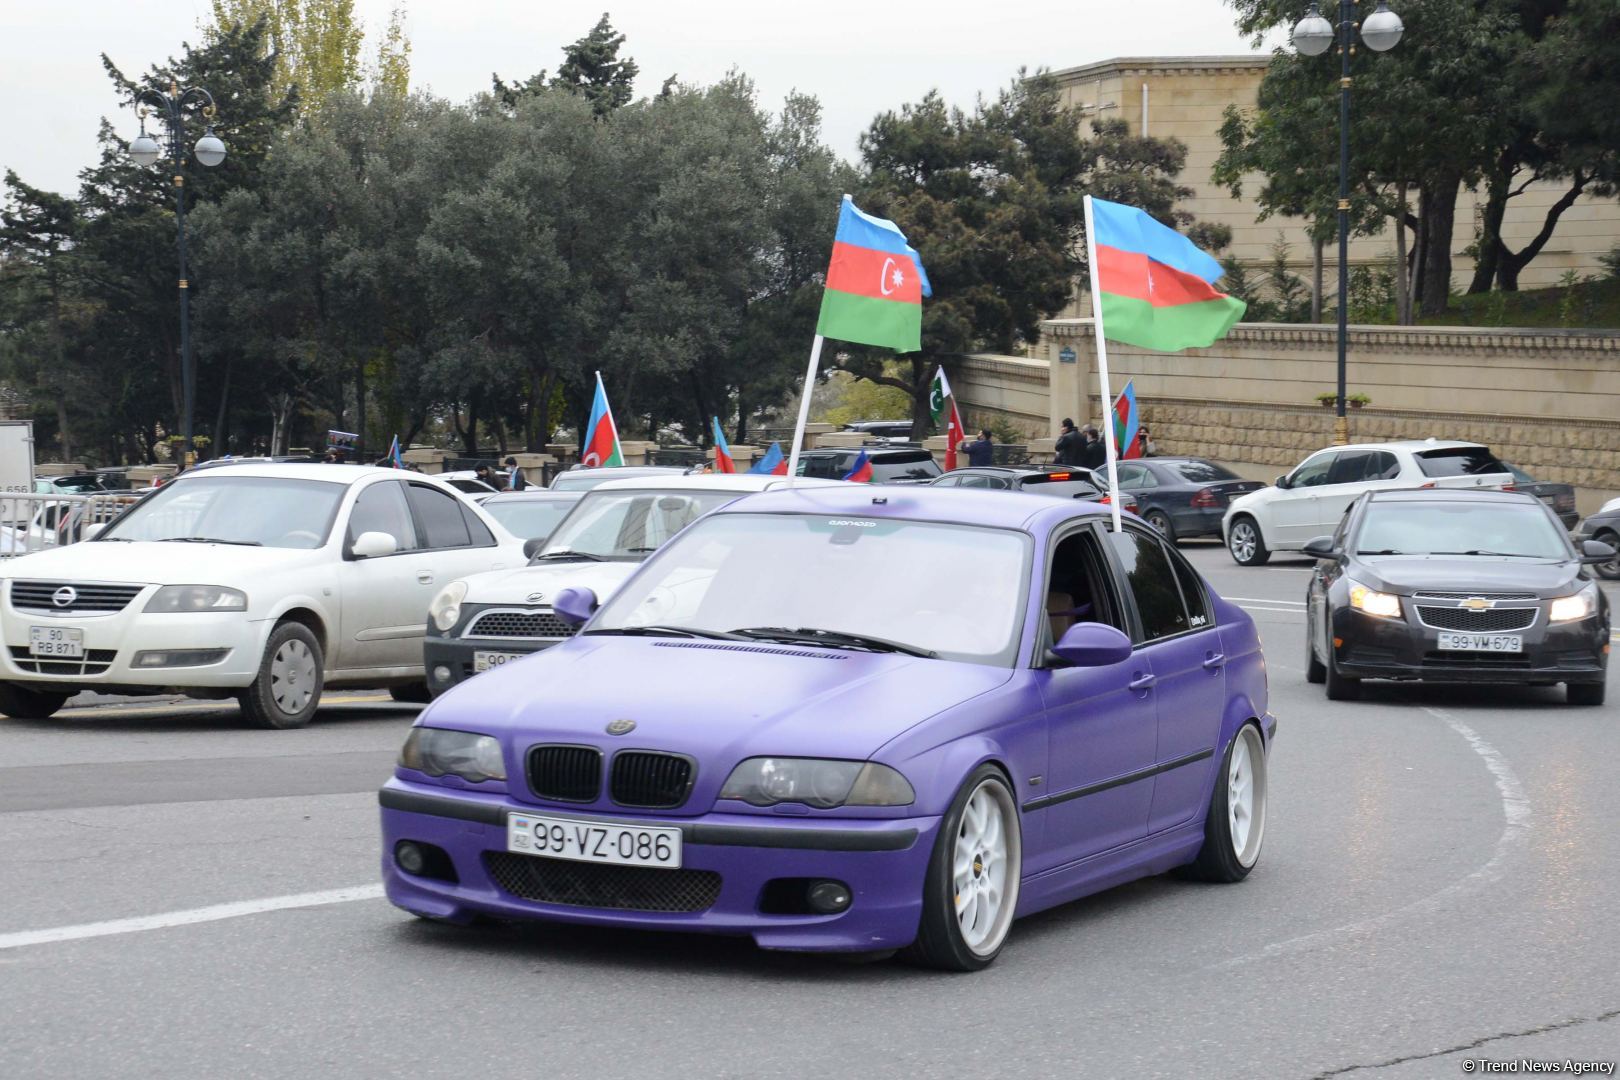 Festive procession in Baku in connection with liberation of Azerbaijan’s Lachin district (PHOTO)